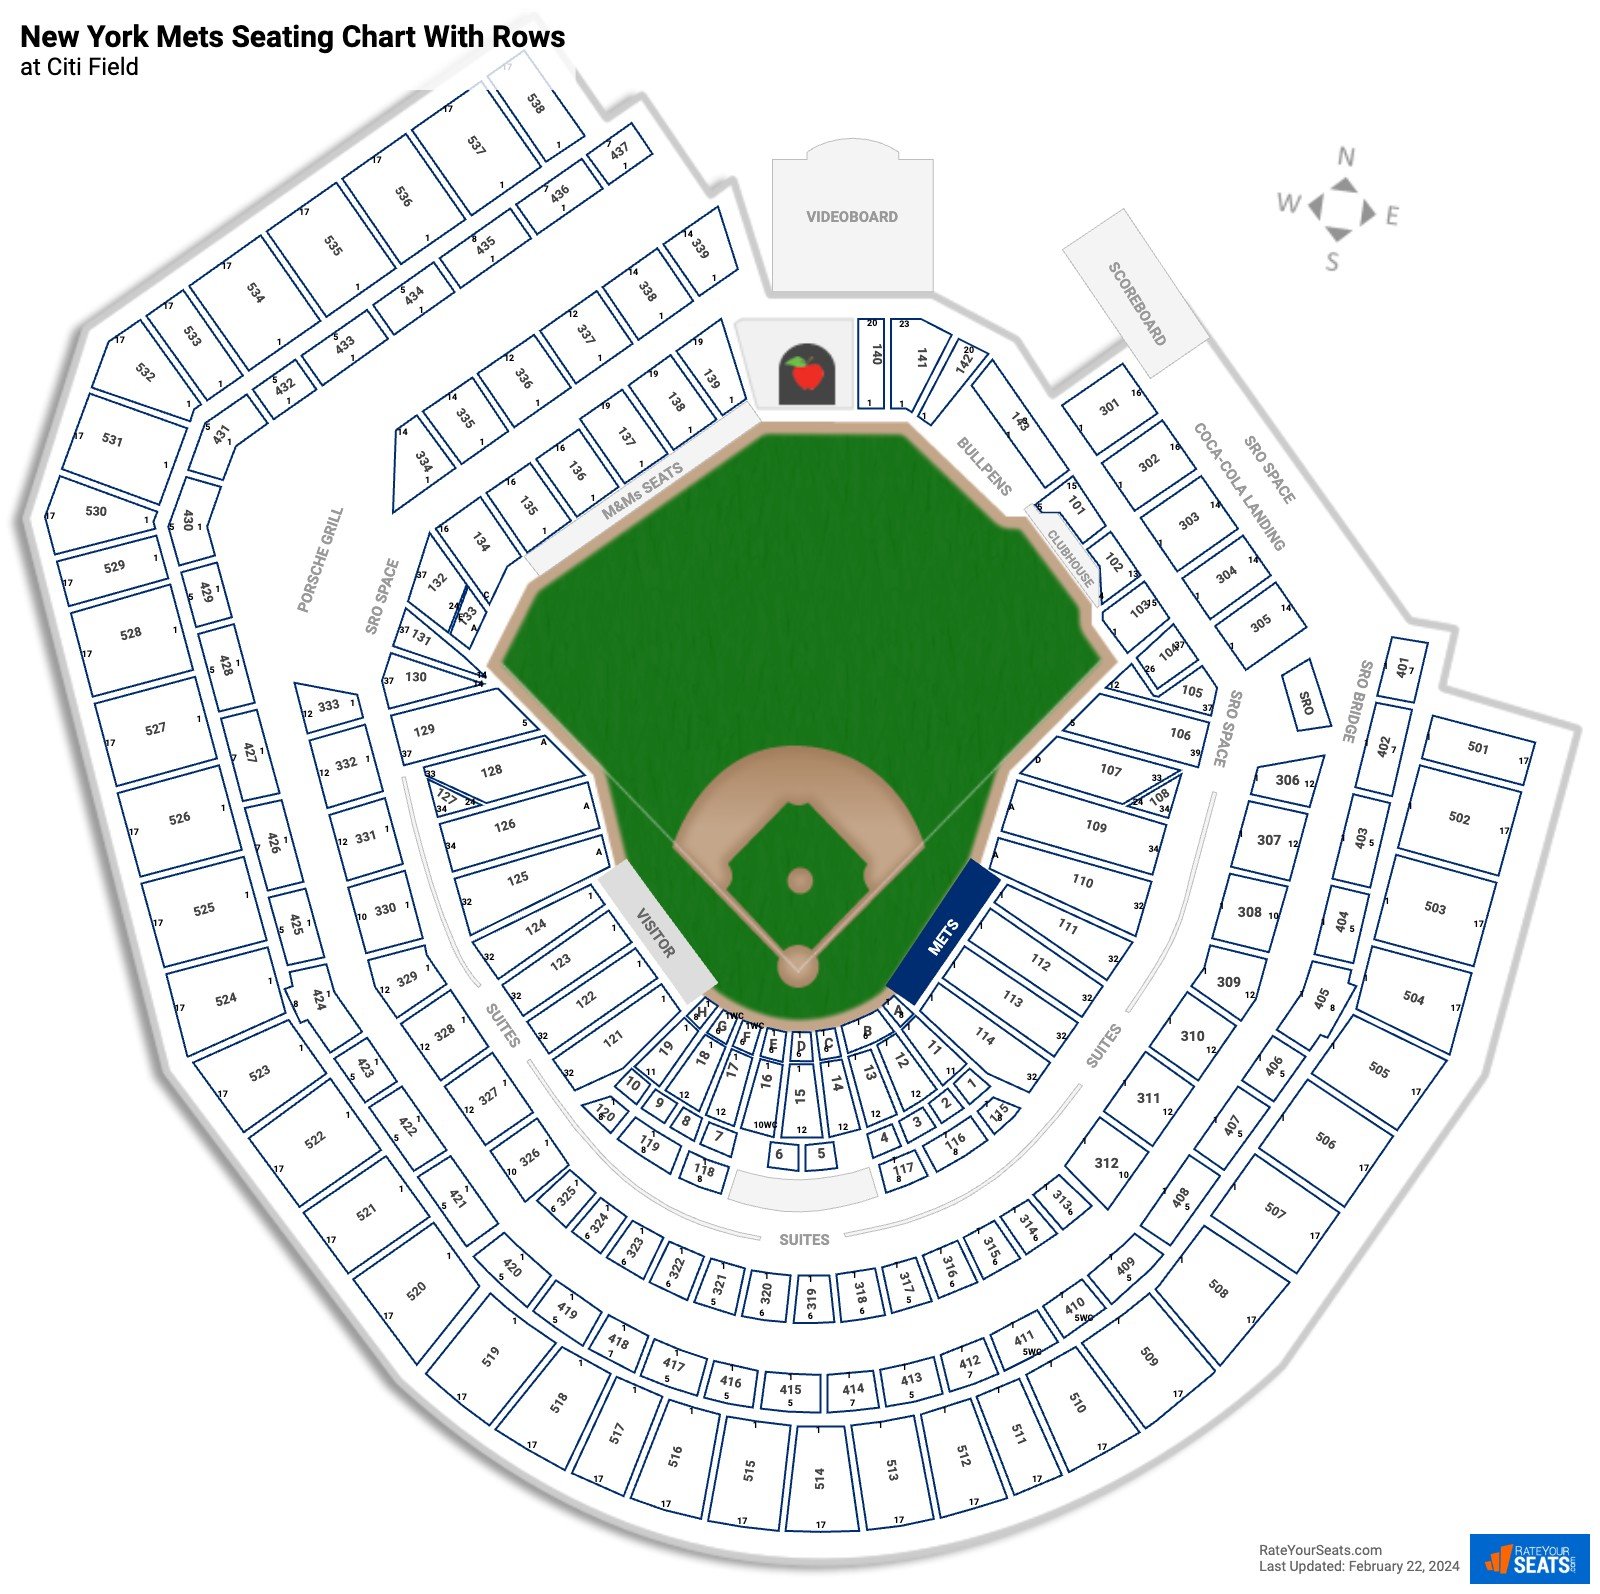 Citi Field seating chart with row numbers